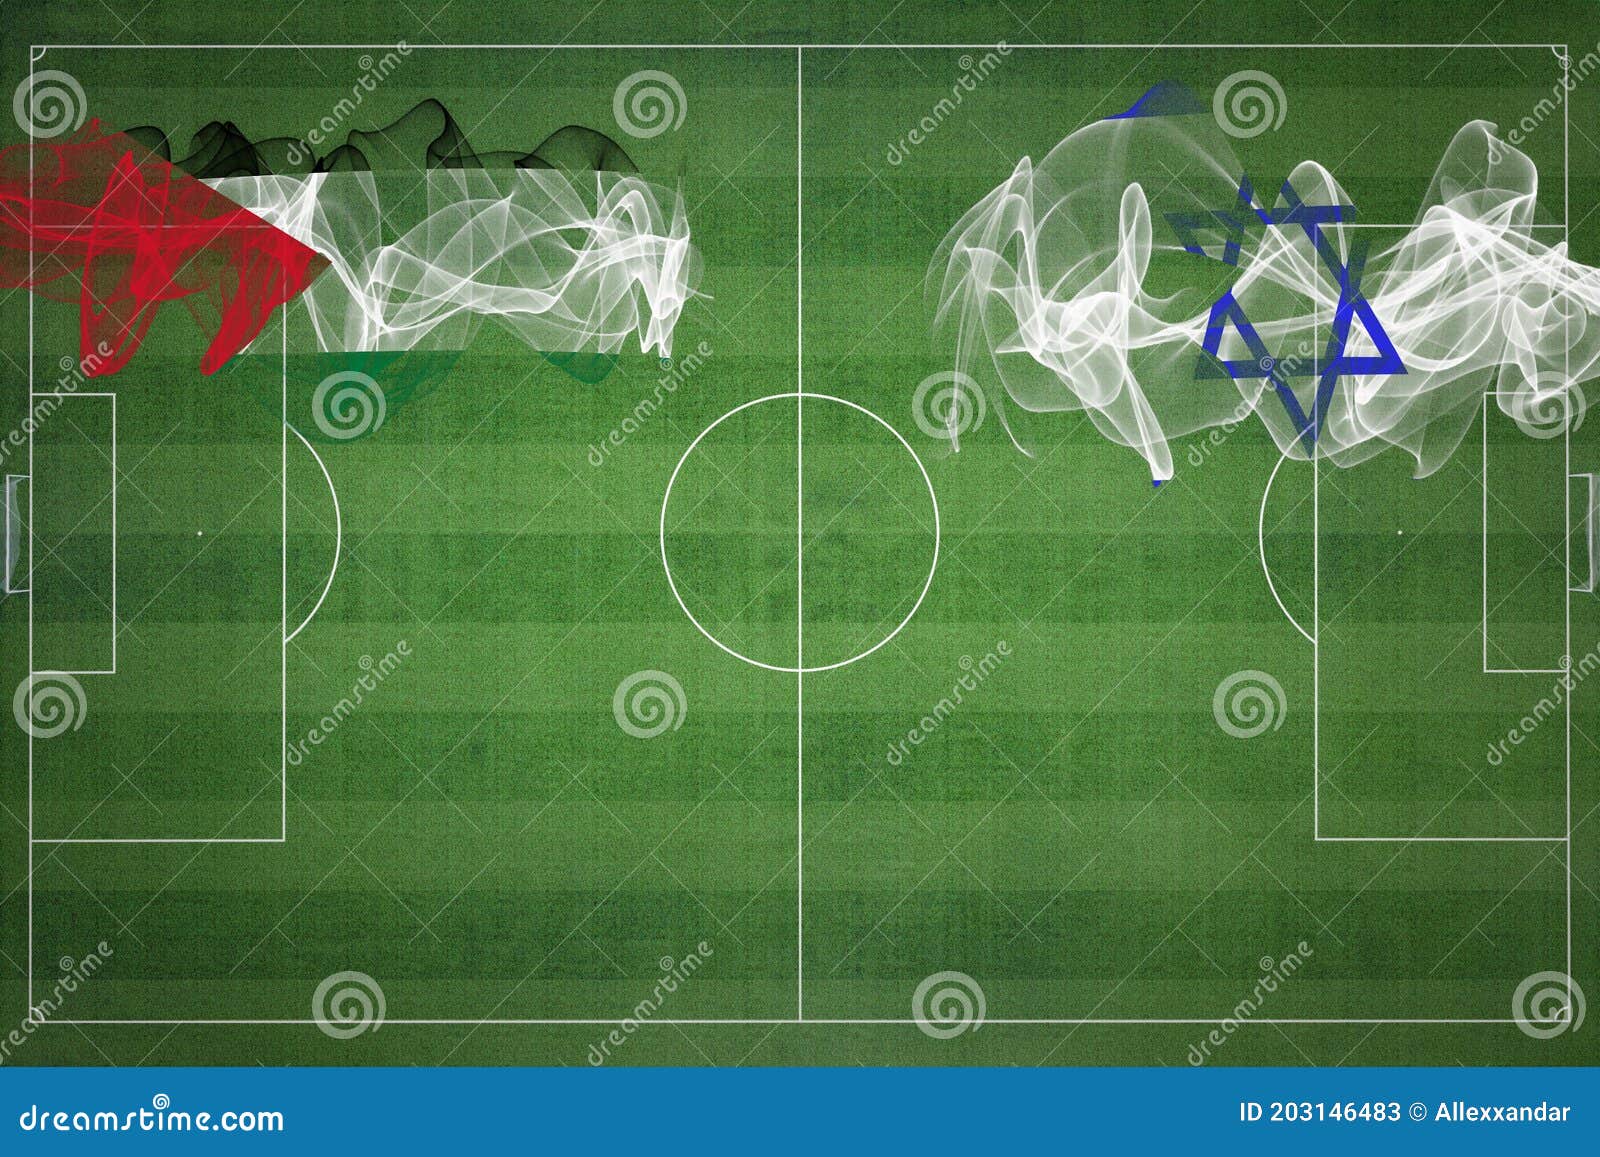 Palestine Vs Israel Soccer Match, National Colors, National Flags